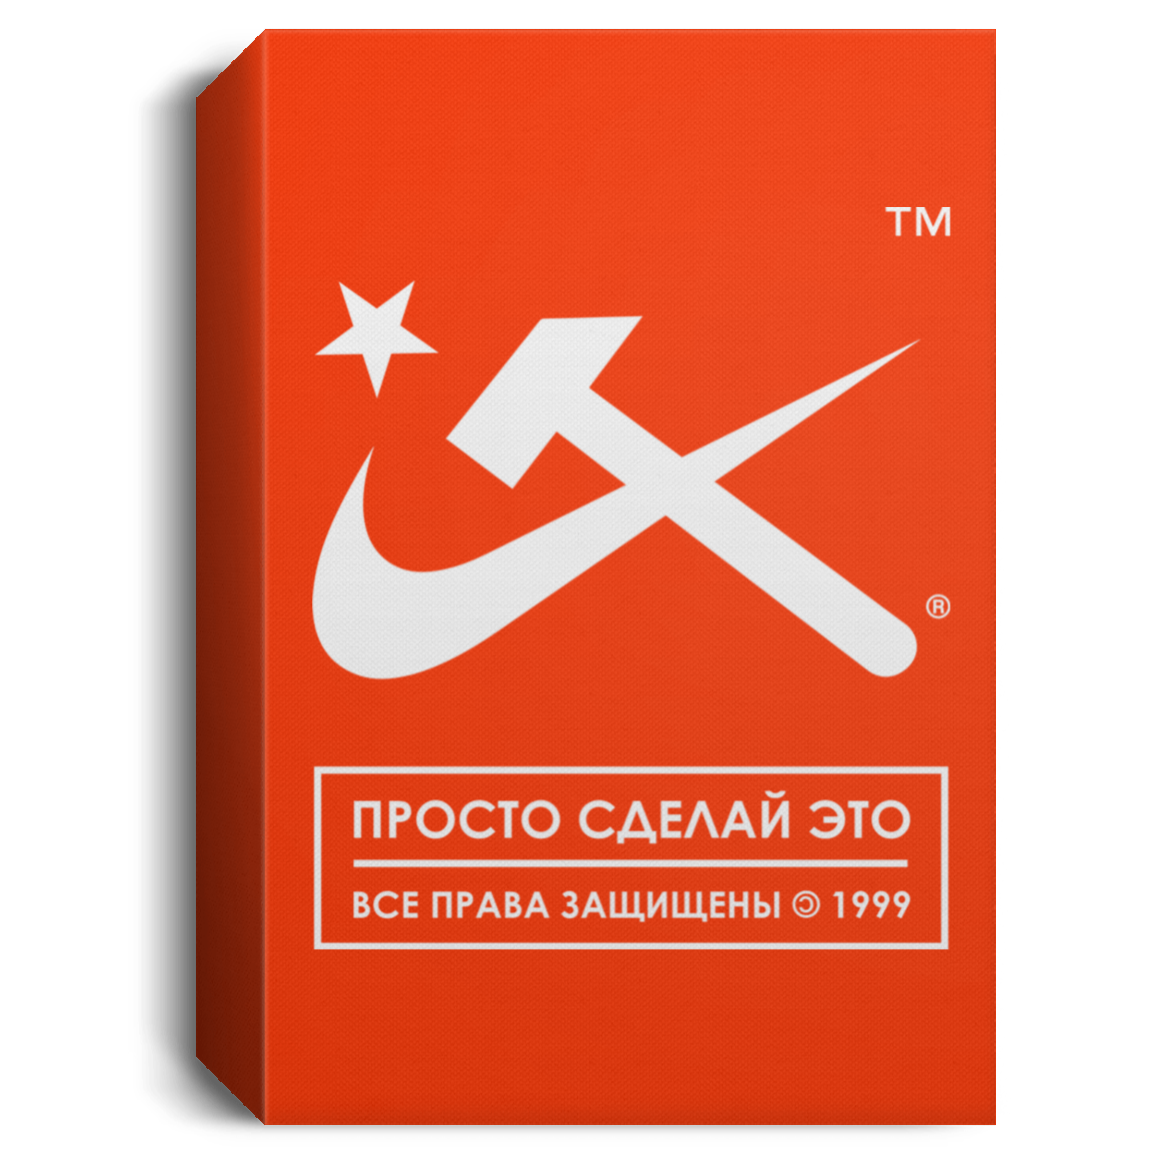 Aesthetic Hammer and Sickle Deluxe Canvas Art